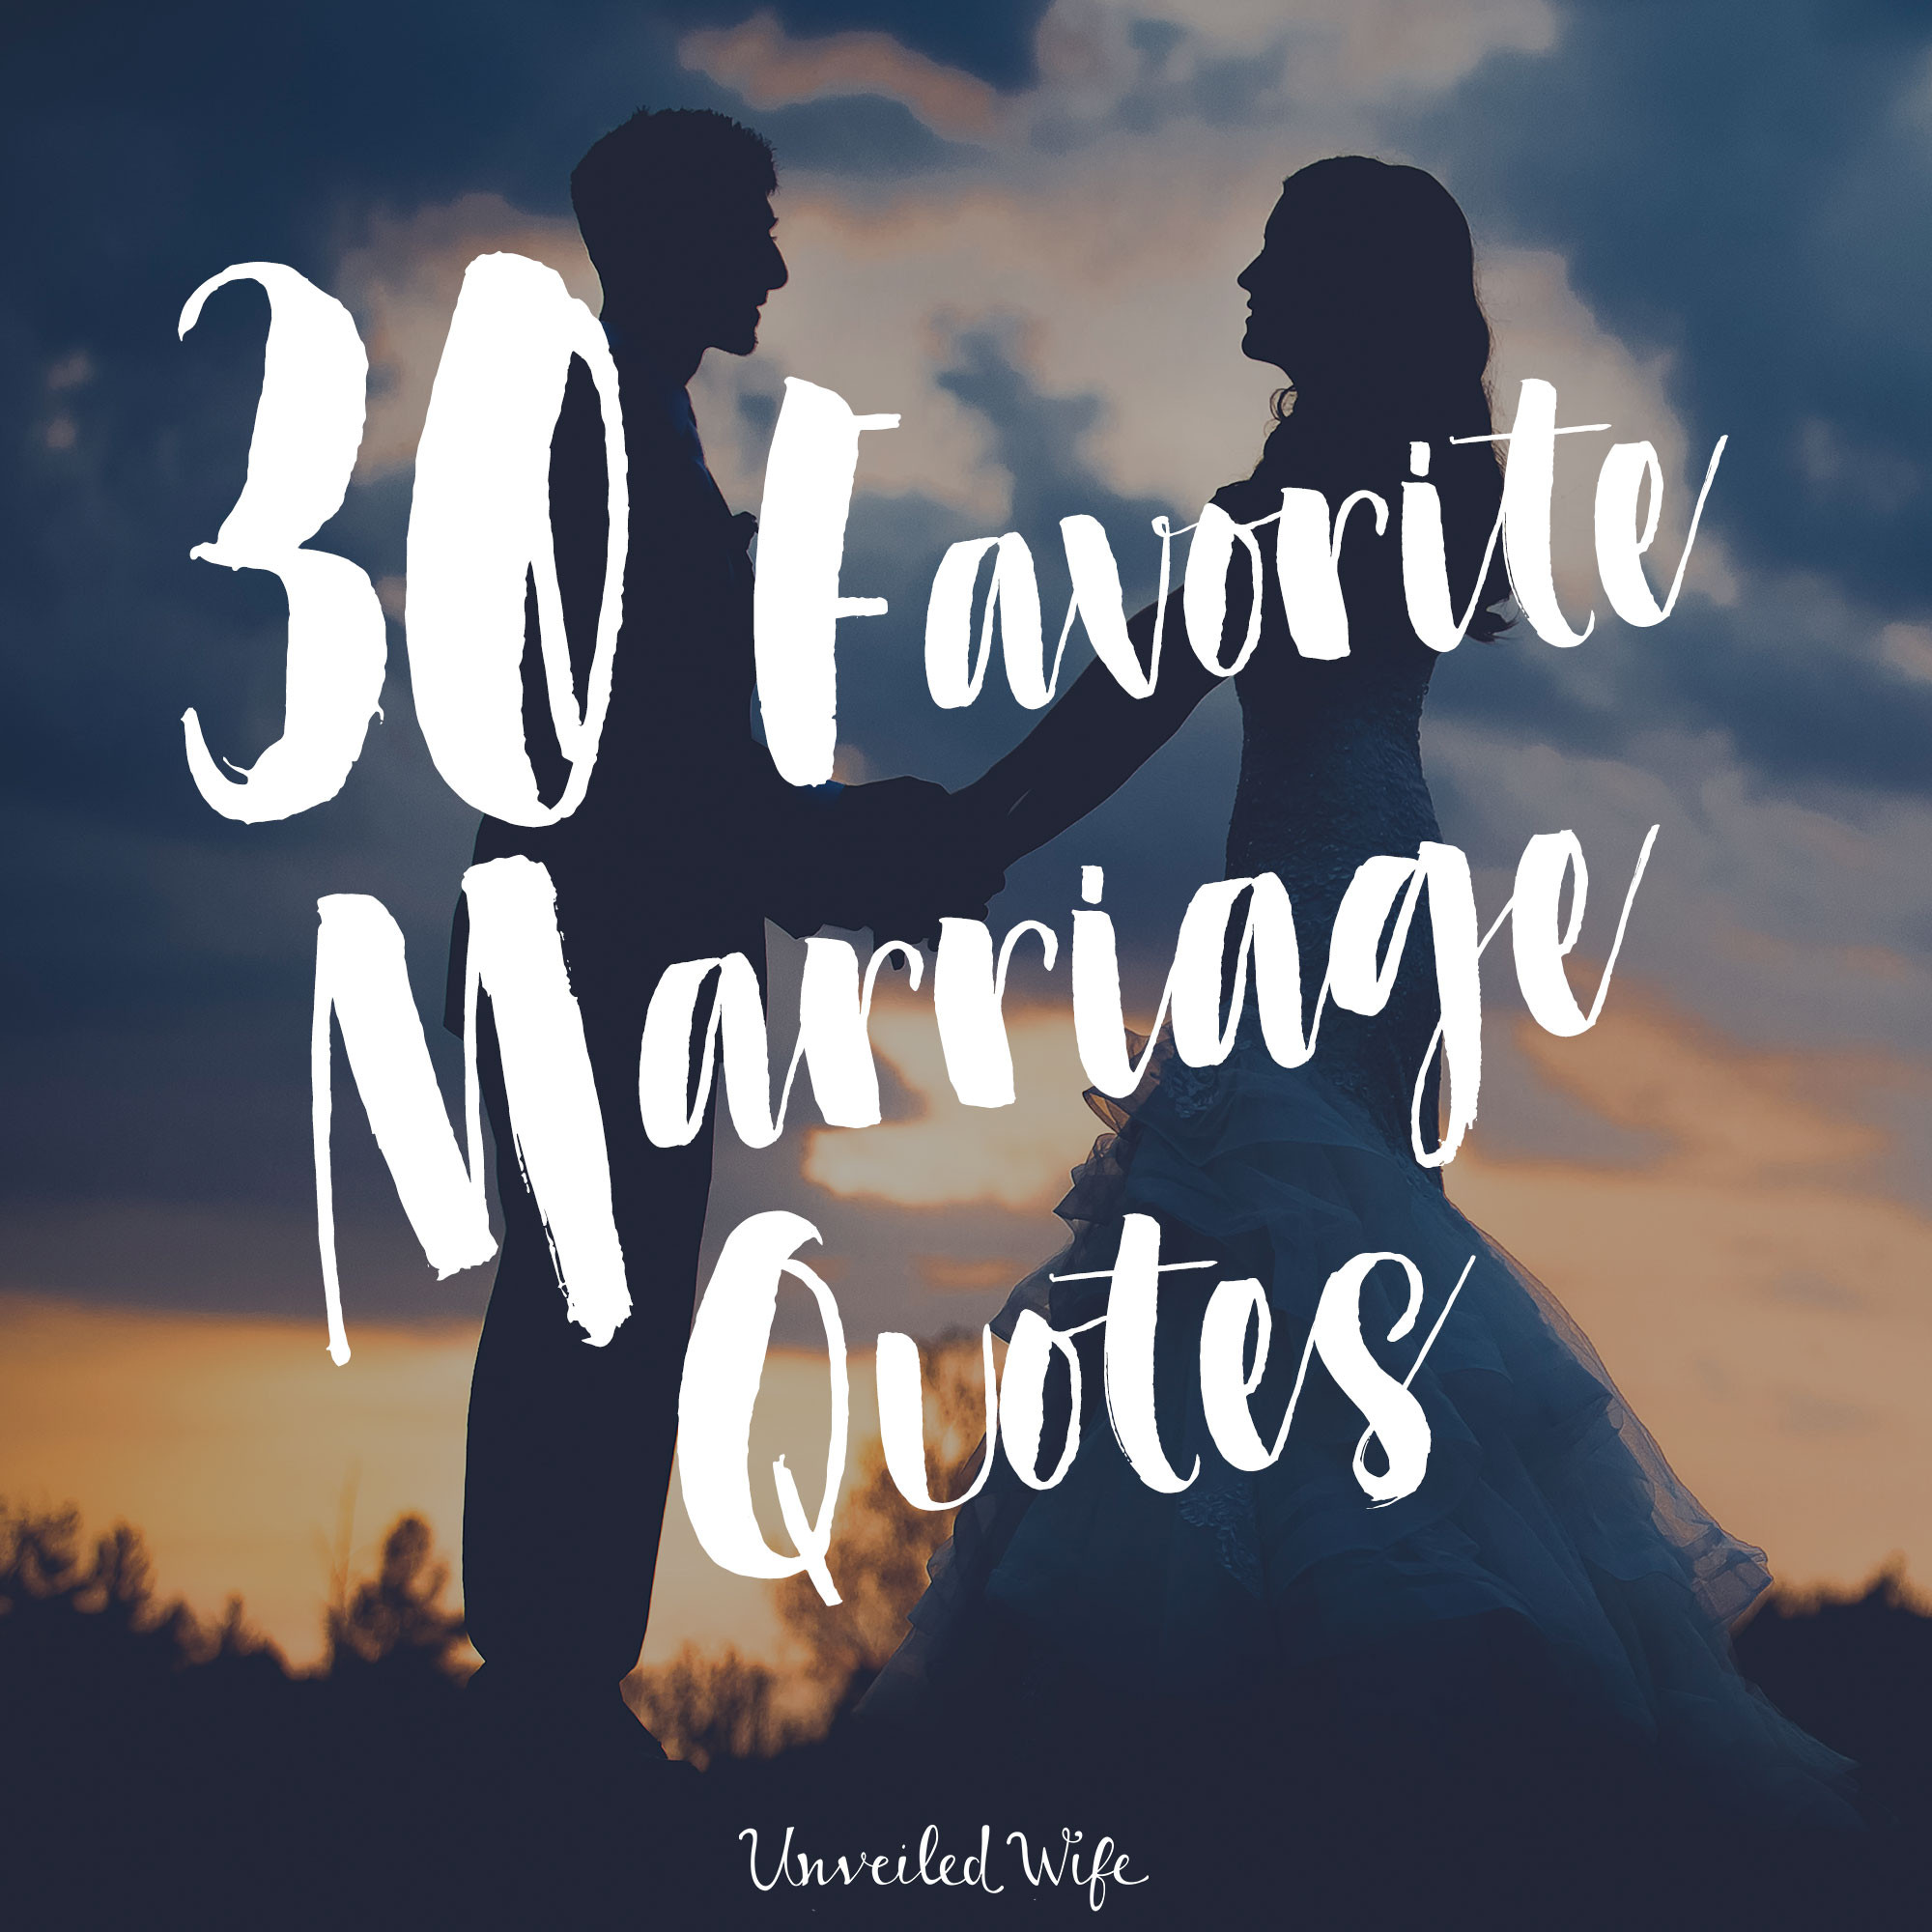 Biblical Quotes About Marriage
 30 Favorite Marriage Quotes & Bible Verses